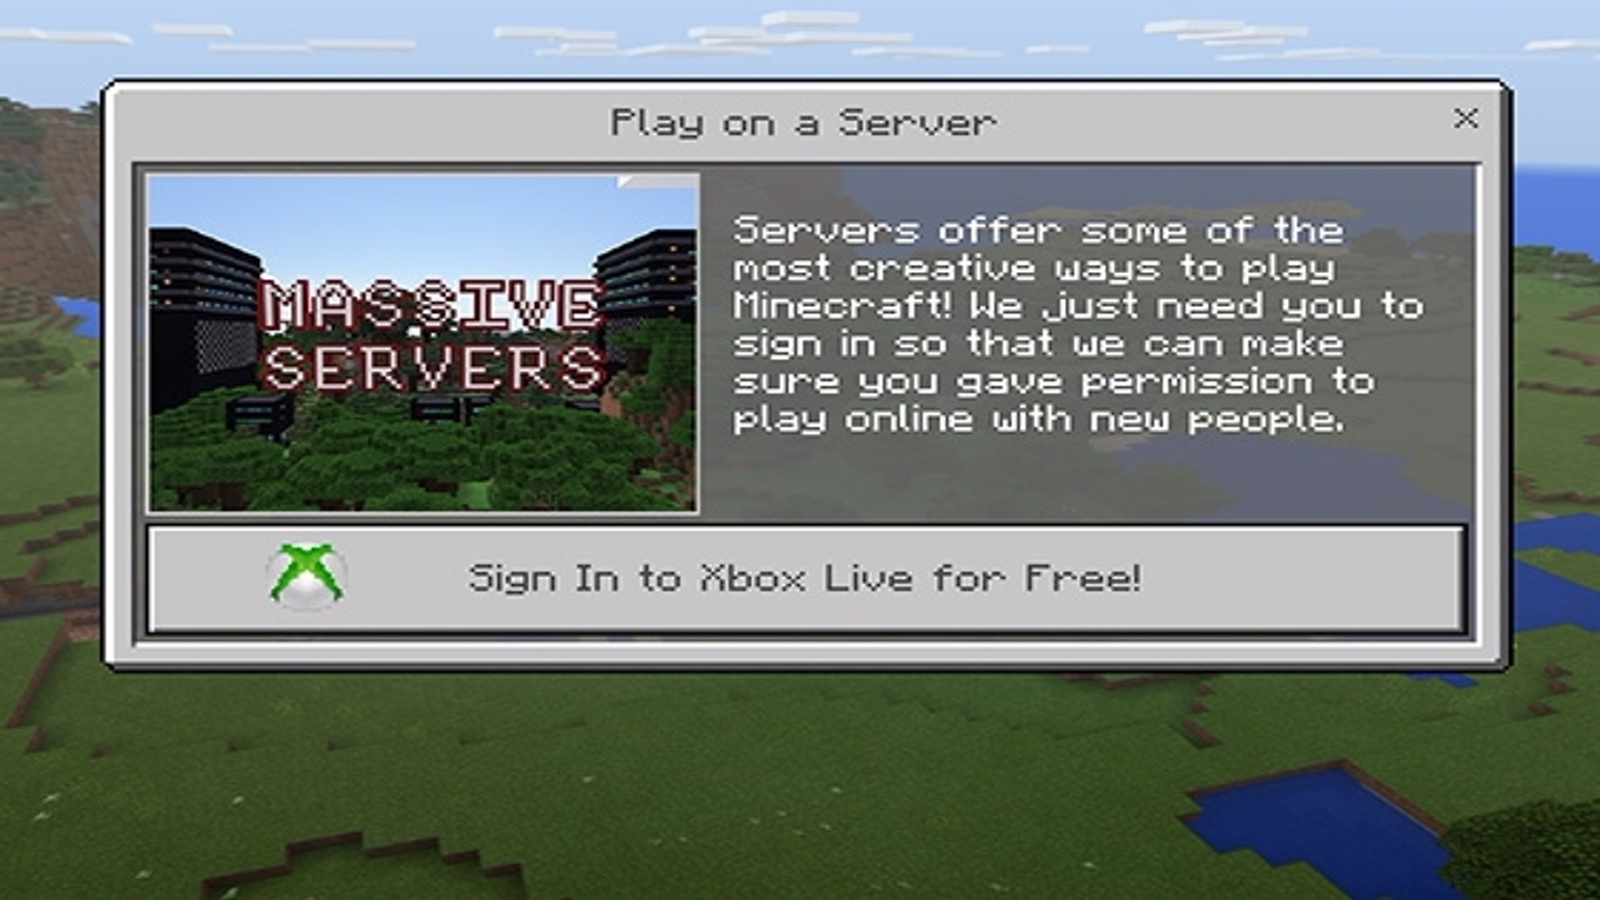 Why can't I play Minecraft multiplayer? - Microsoft Community